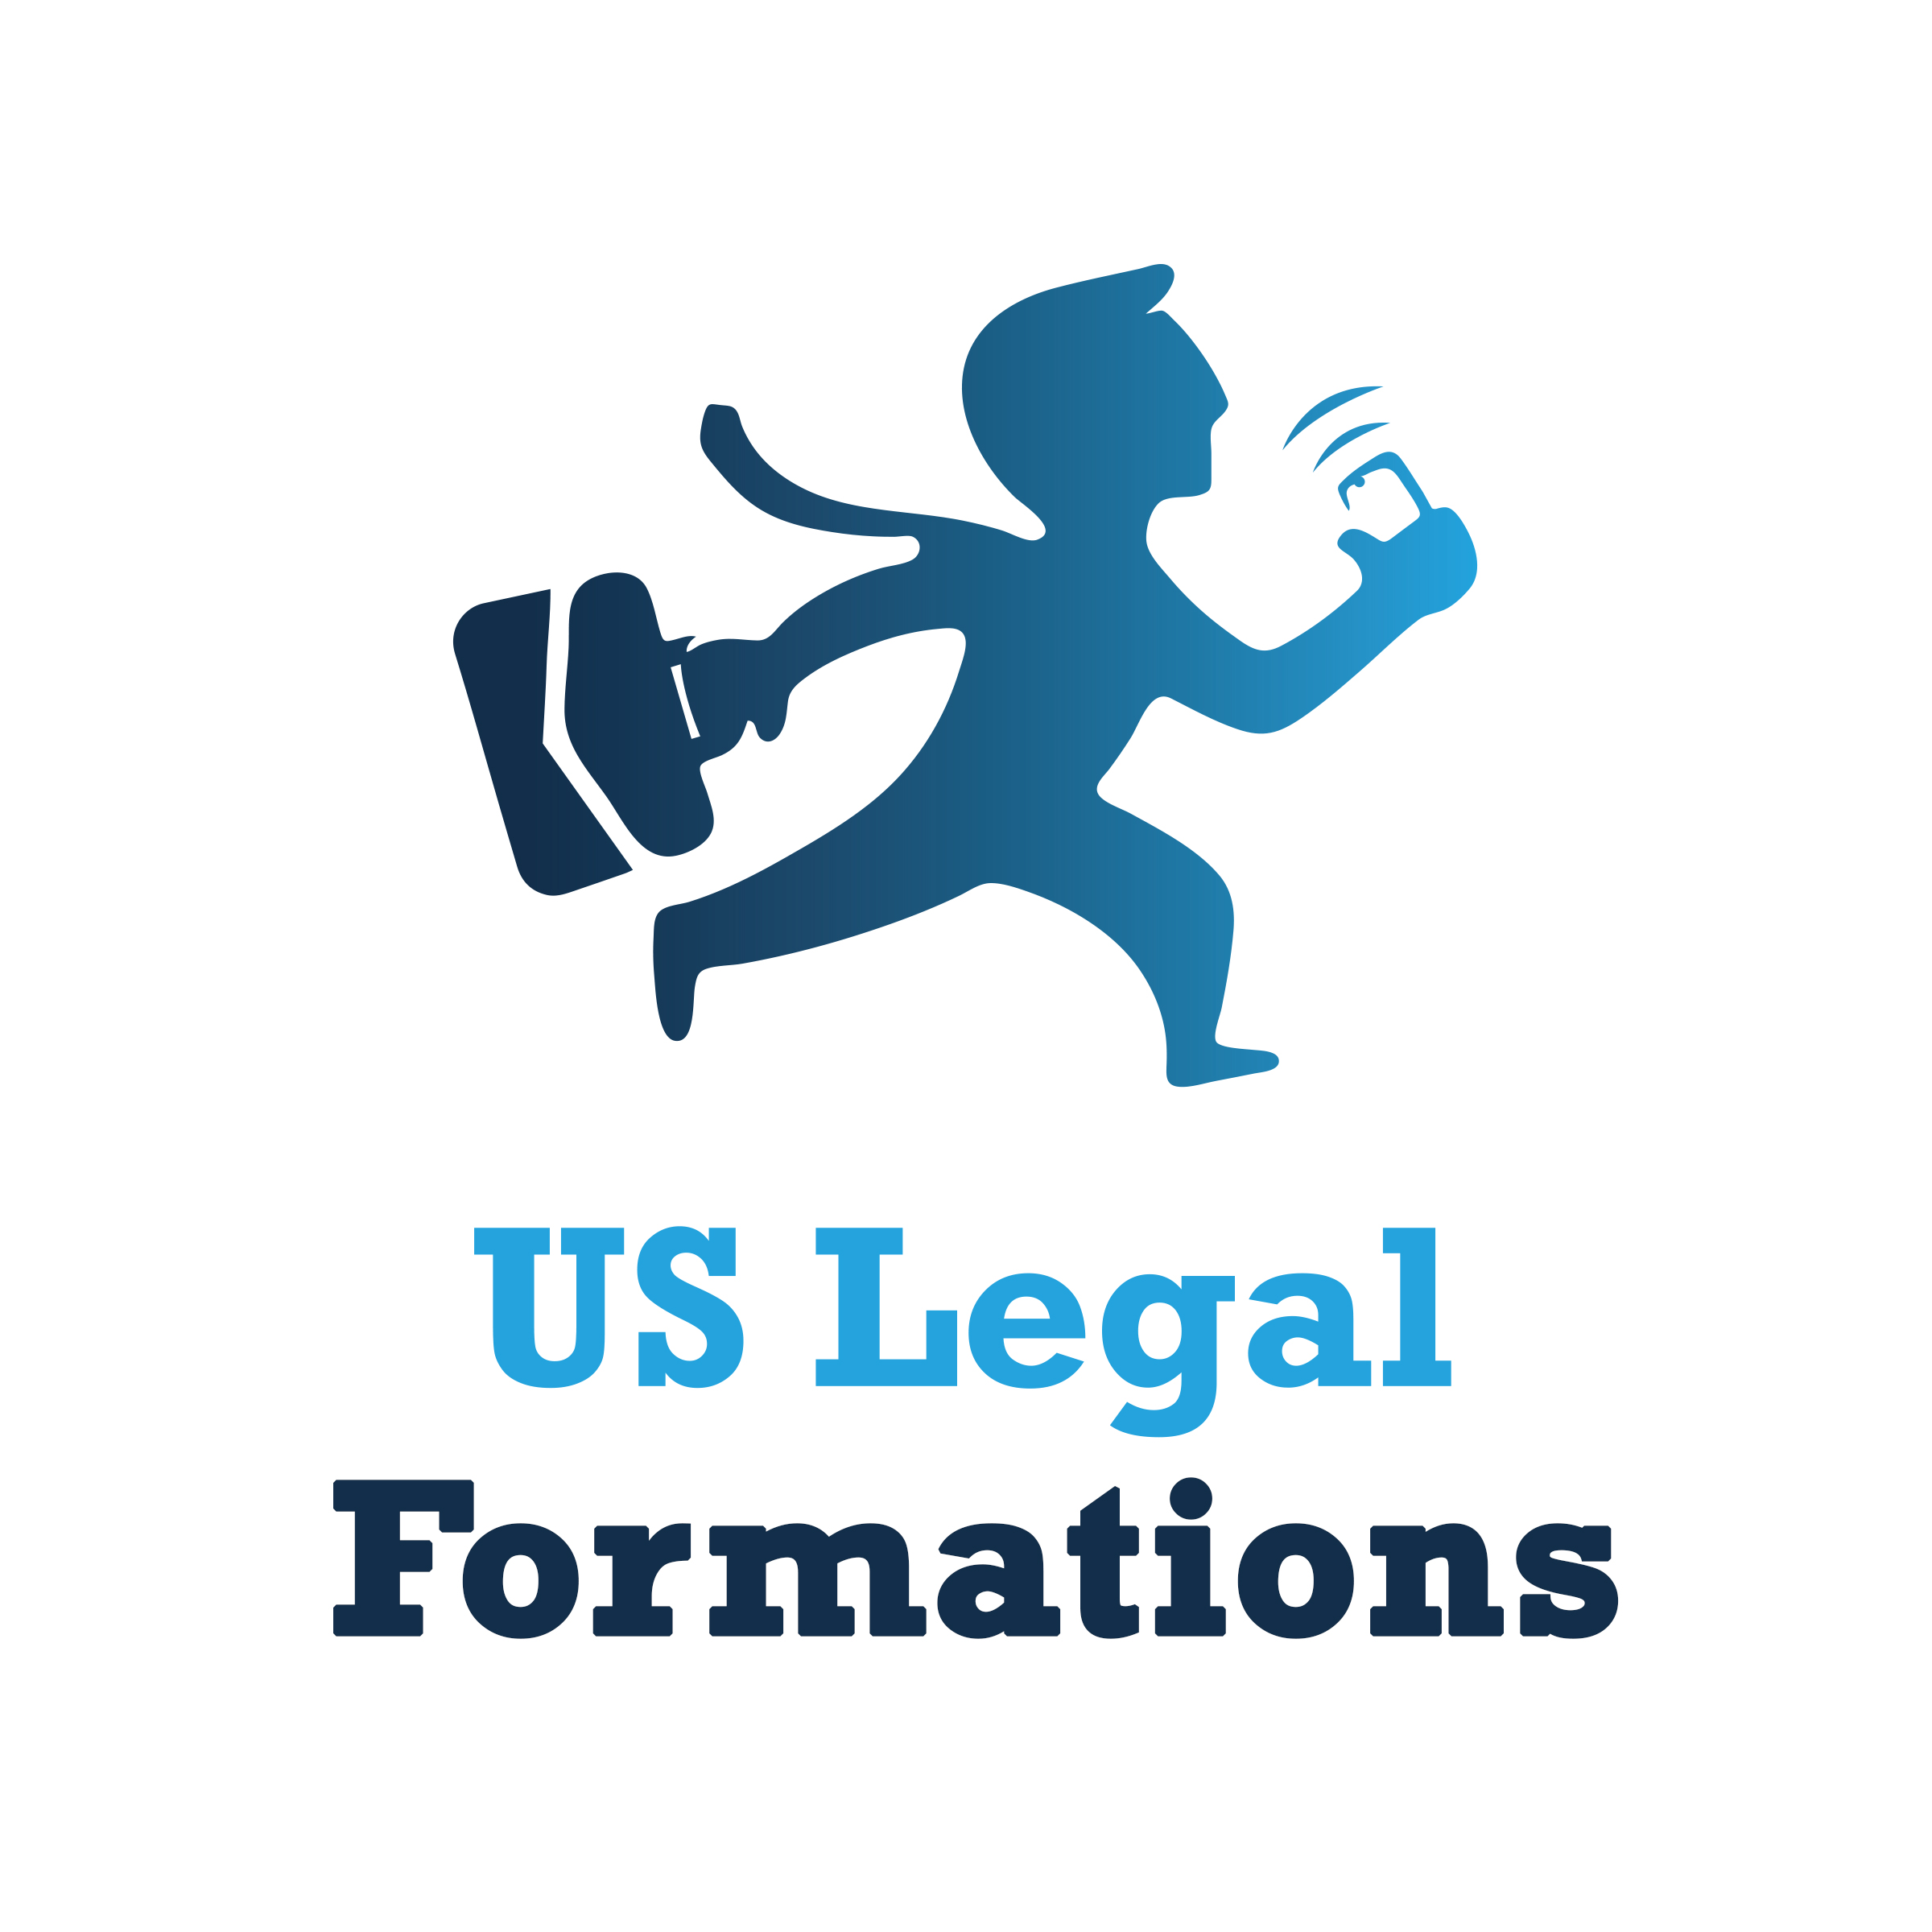 US Legal Formations